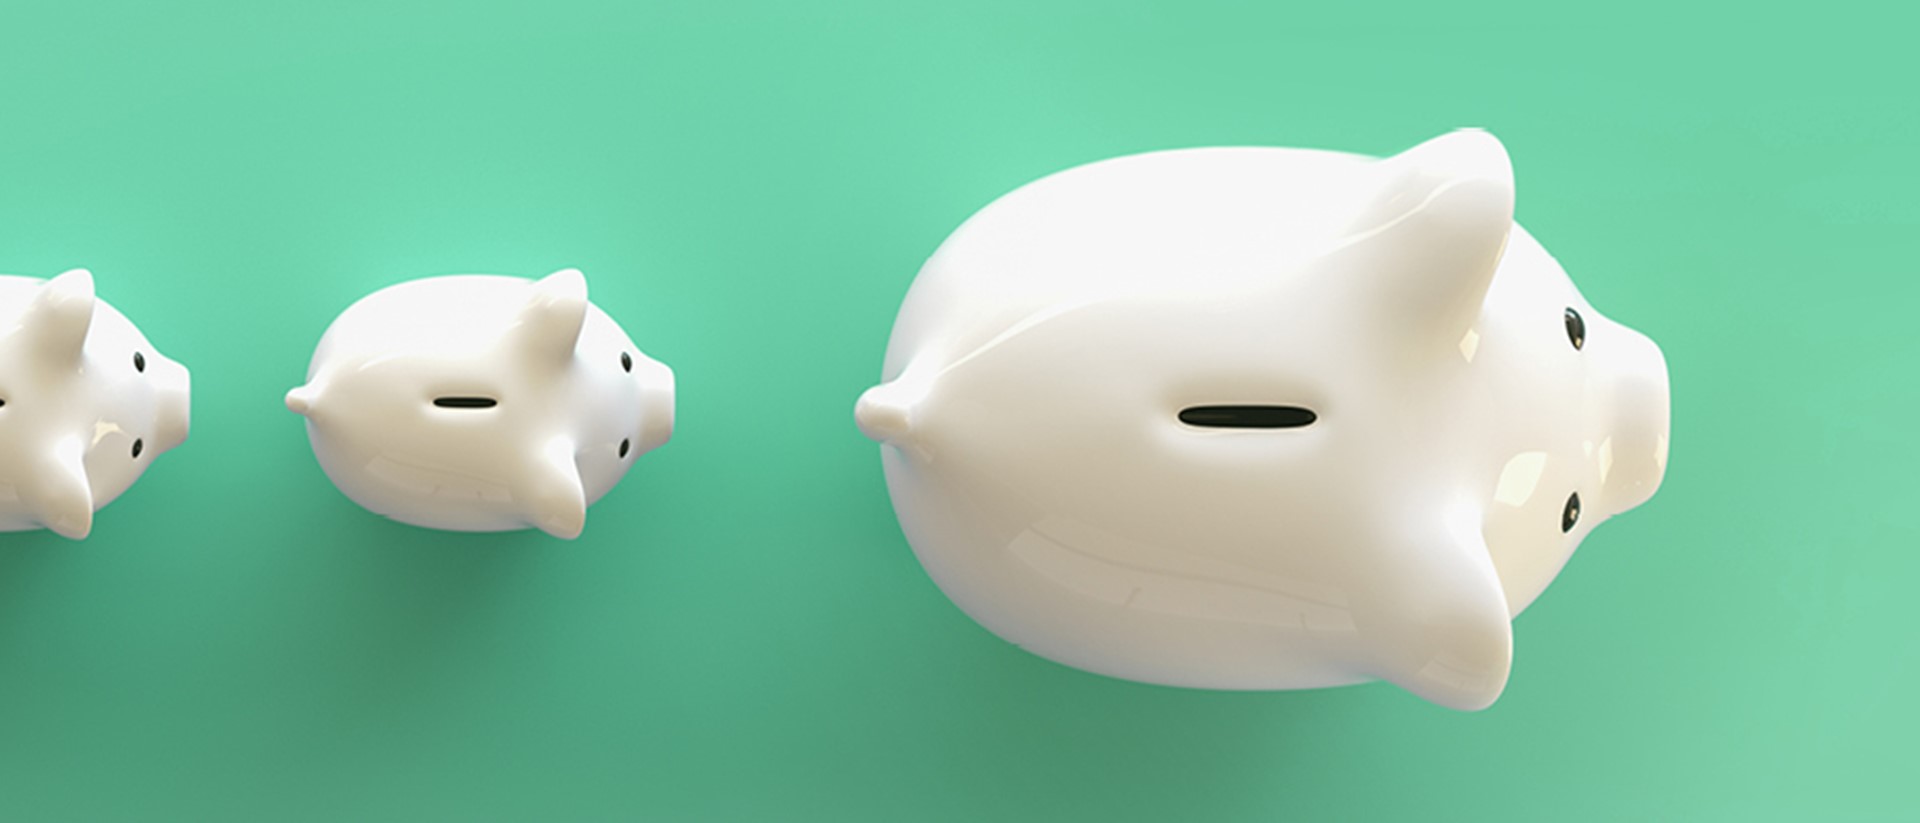 Image of piggy banks on a teal background